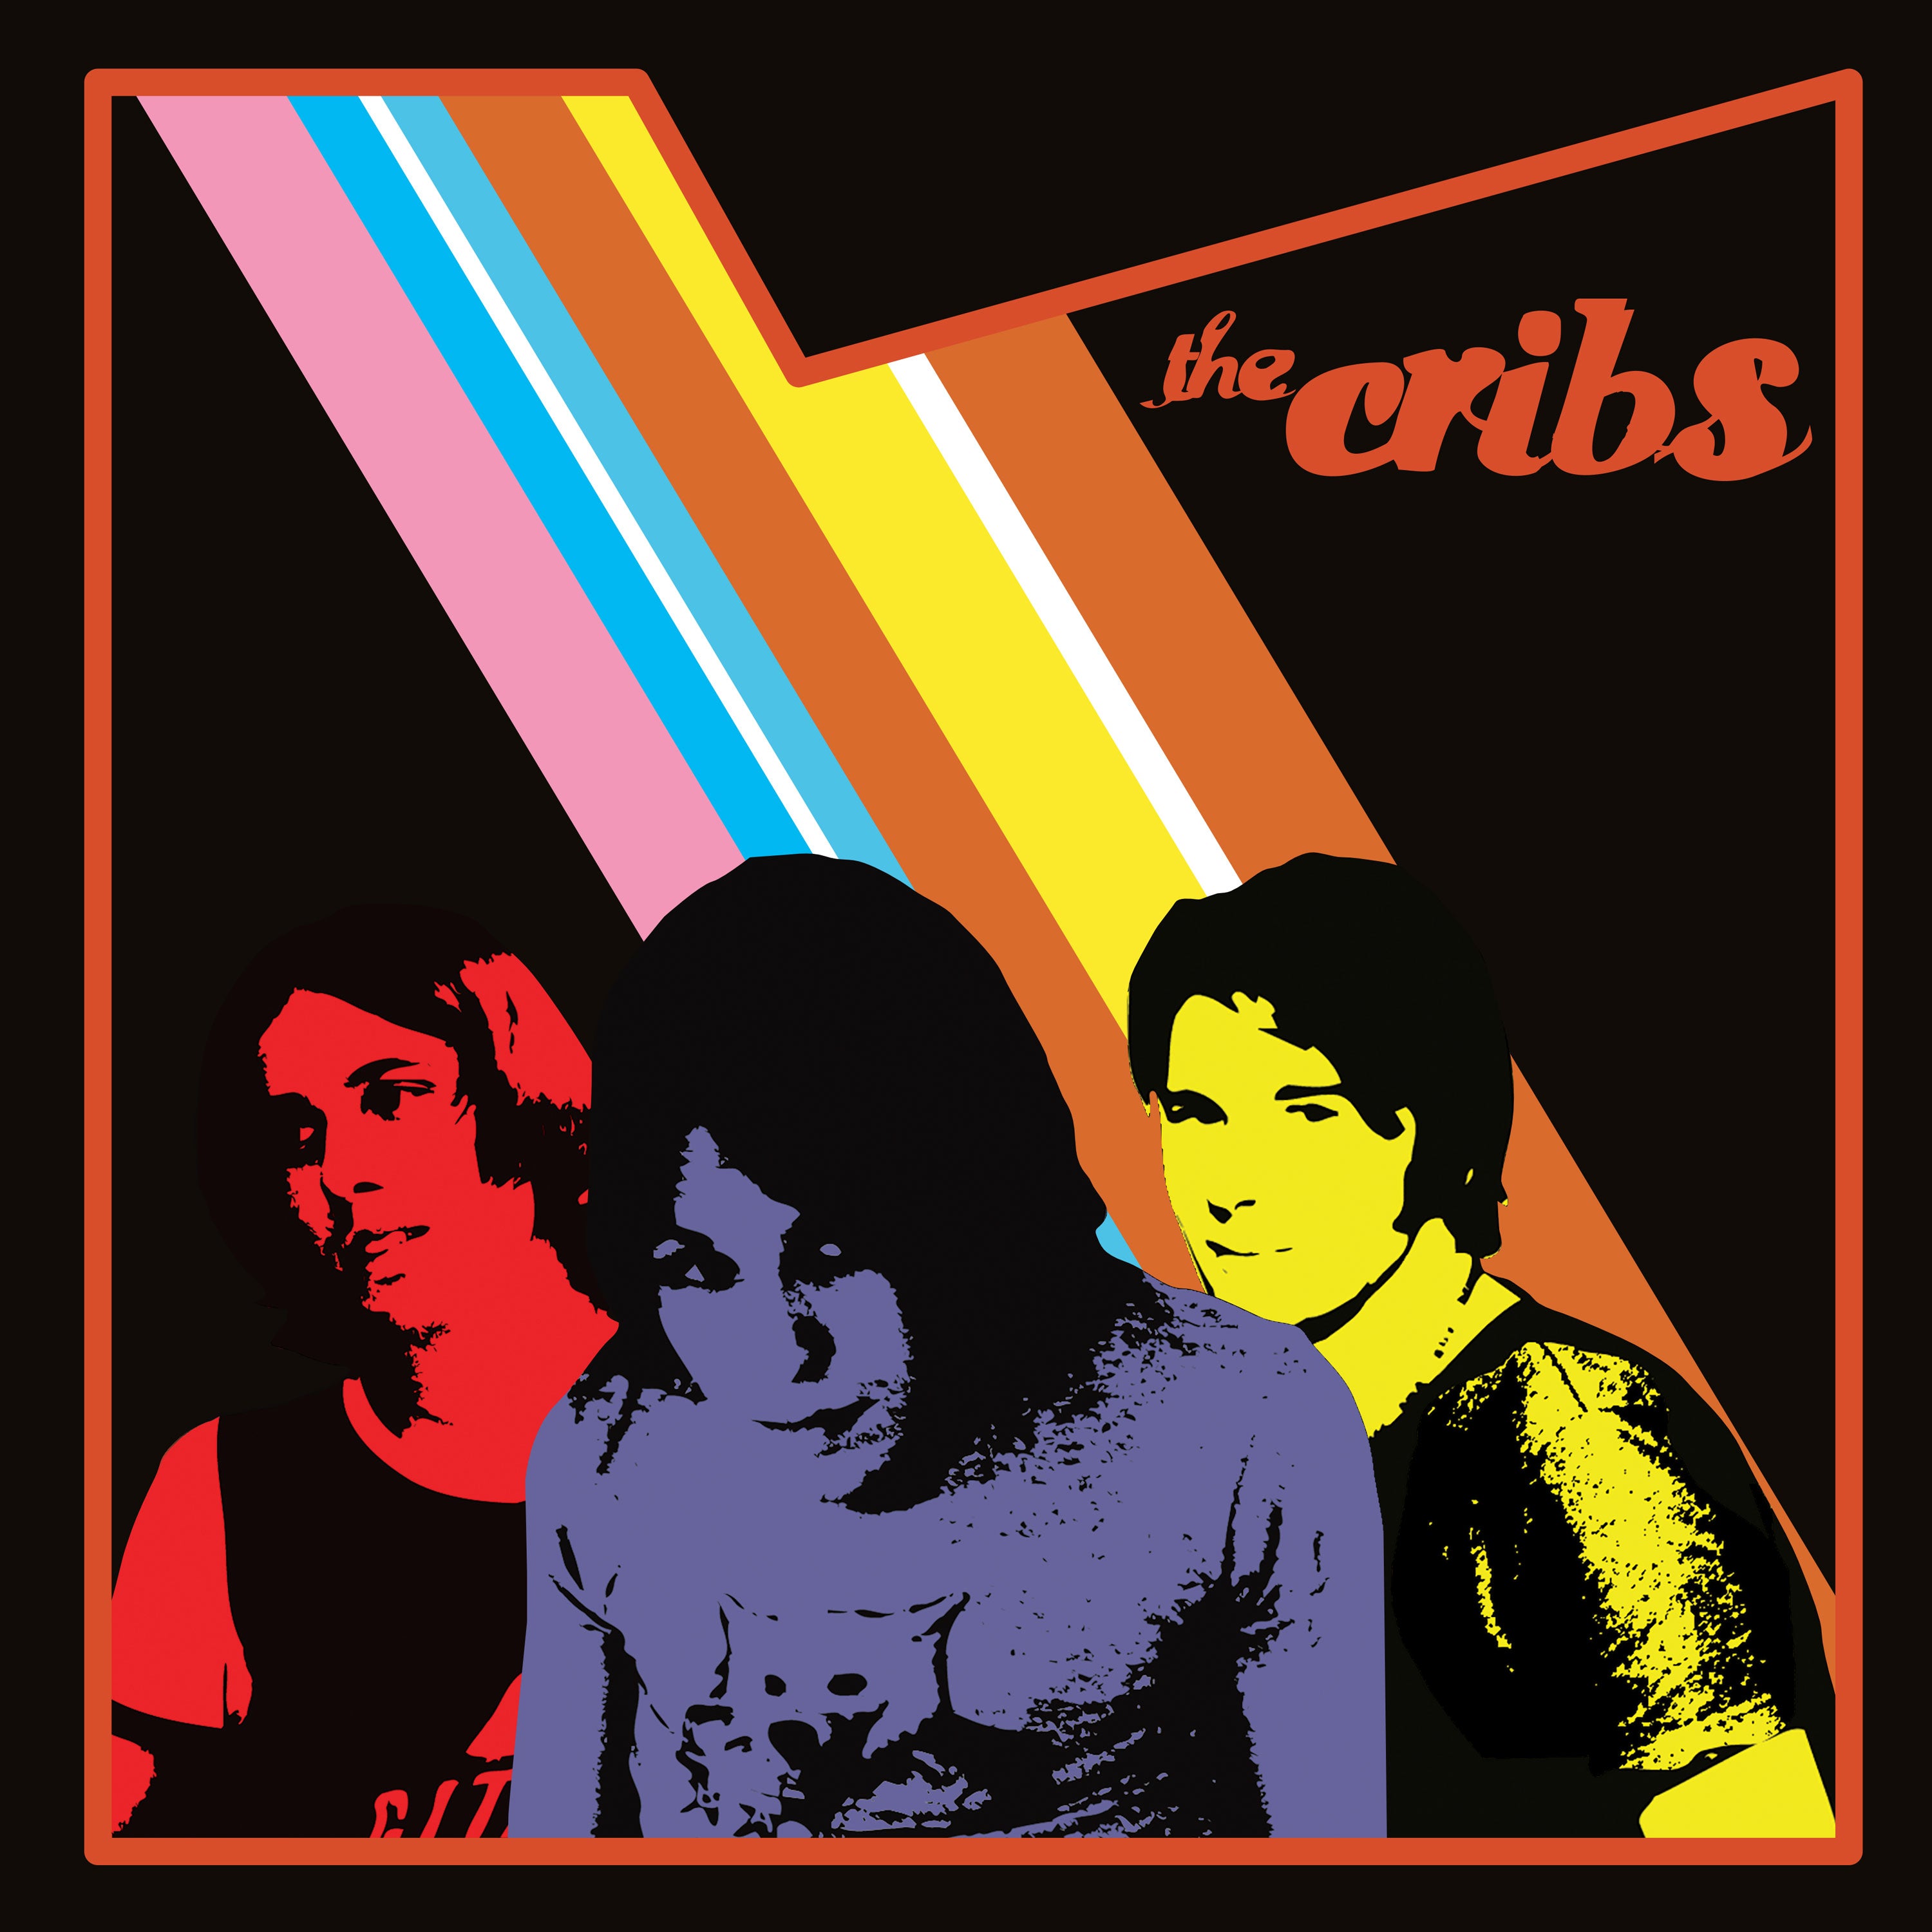 The Cribs - The Cribs (Pink Vinyl)